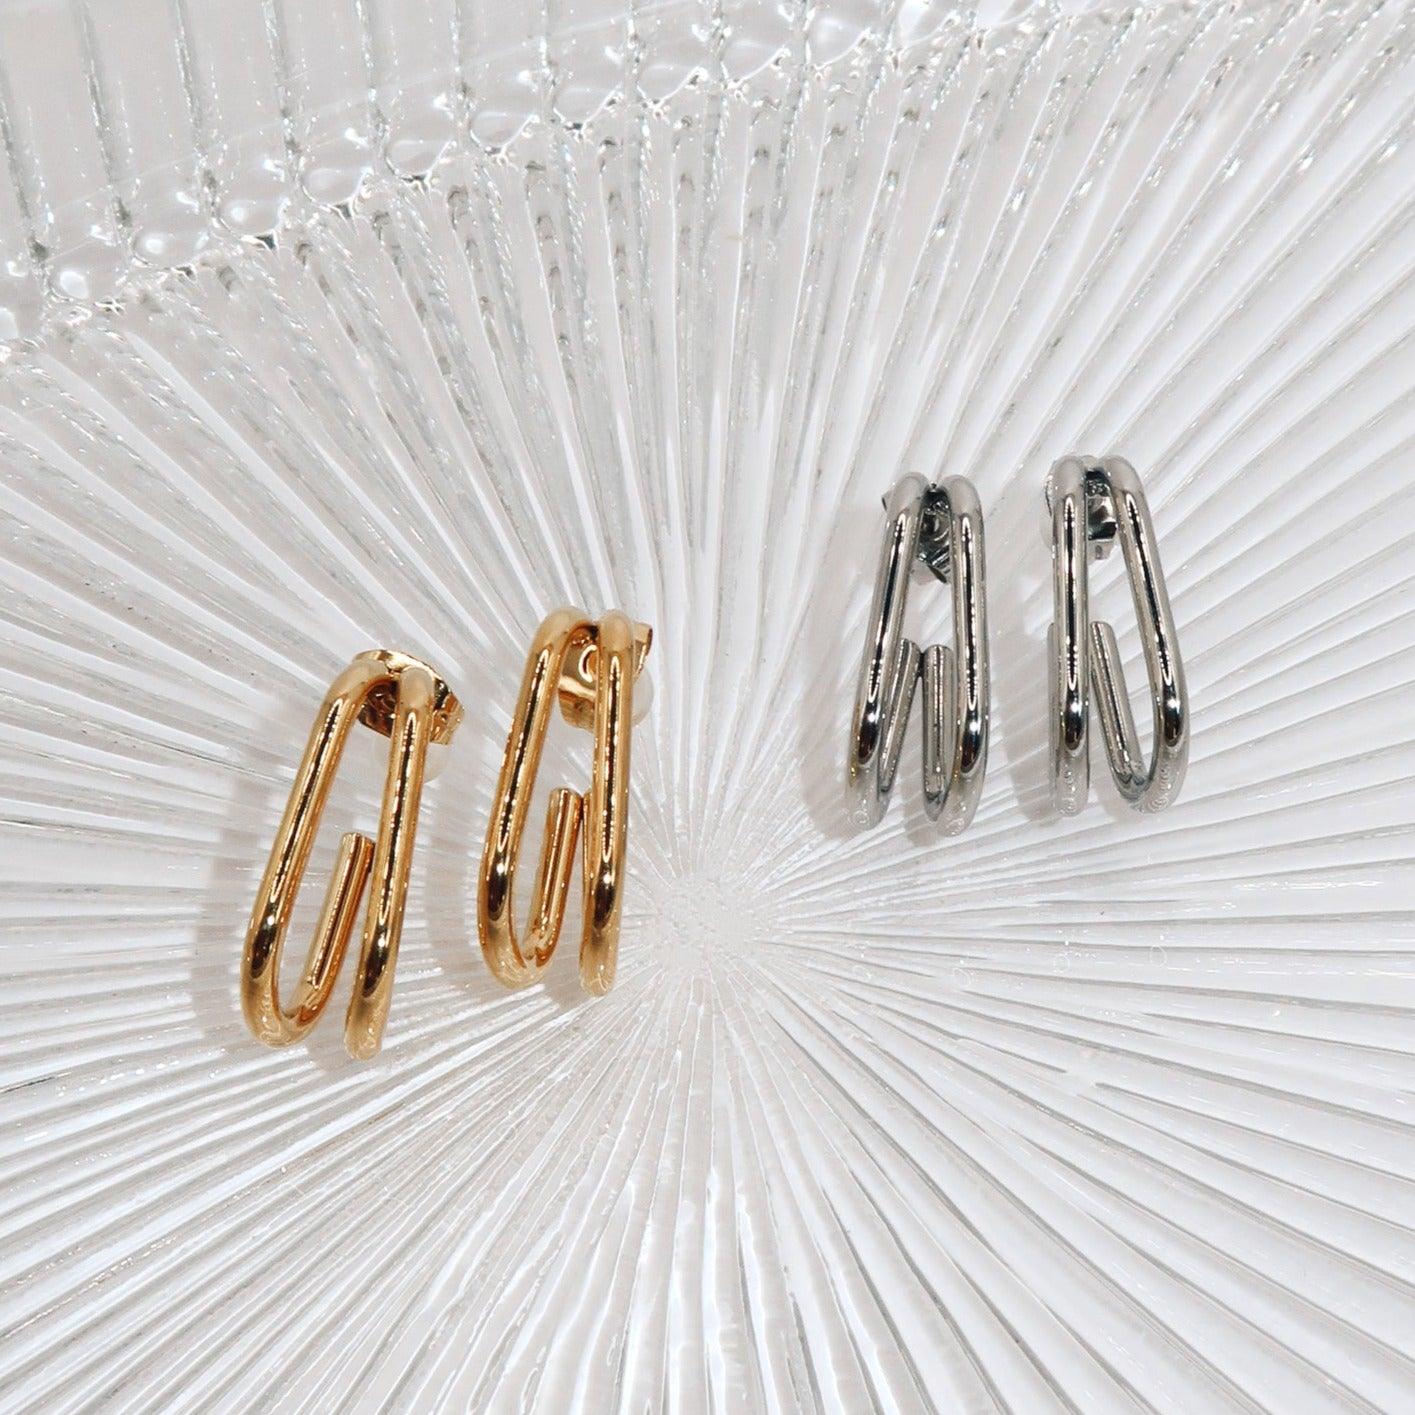 LILY - 18K PVD Gold Plated Double Loop Earrings - Mixed Metals